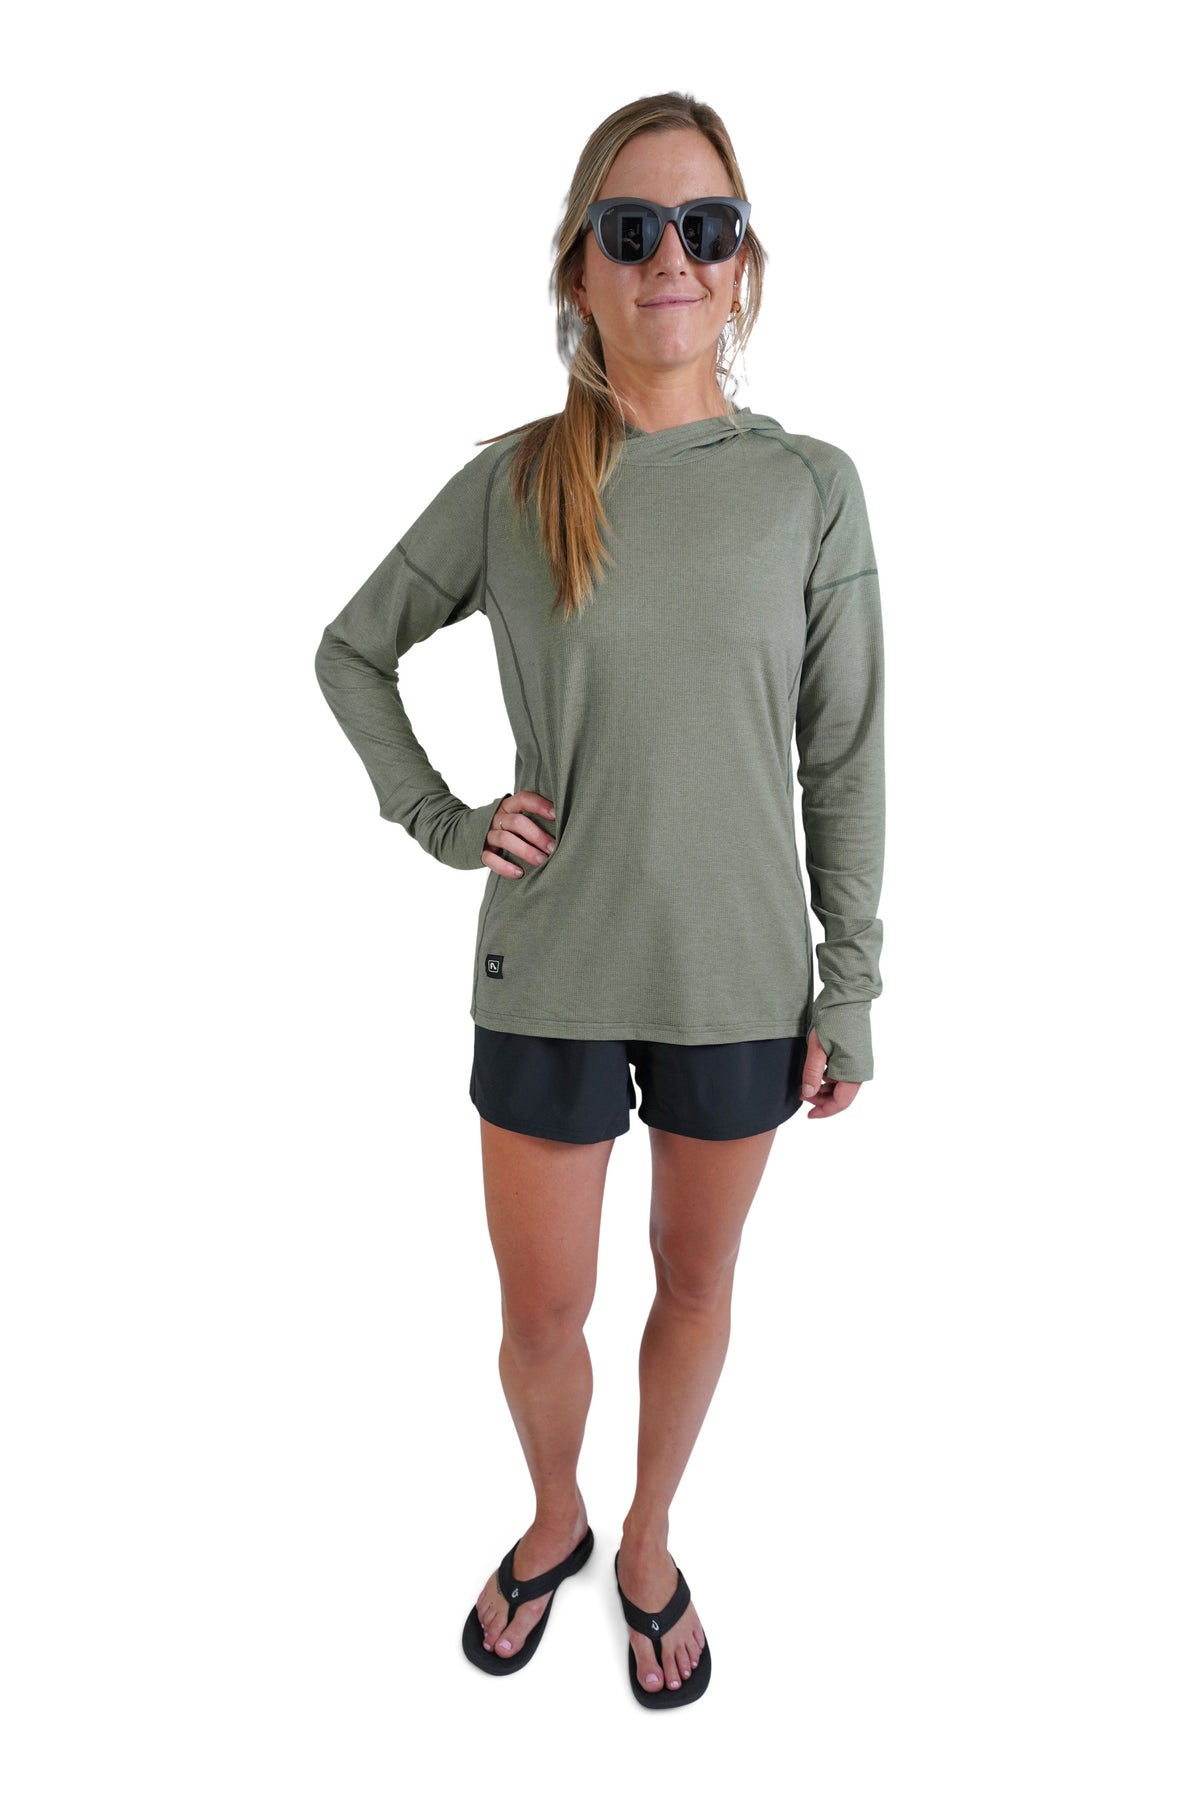 Women's Luna Athletic Tee with Sun Protection Fabric and Pockets